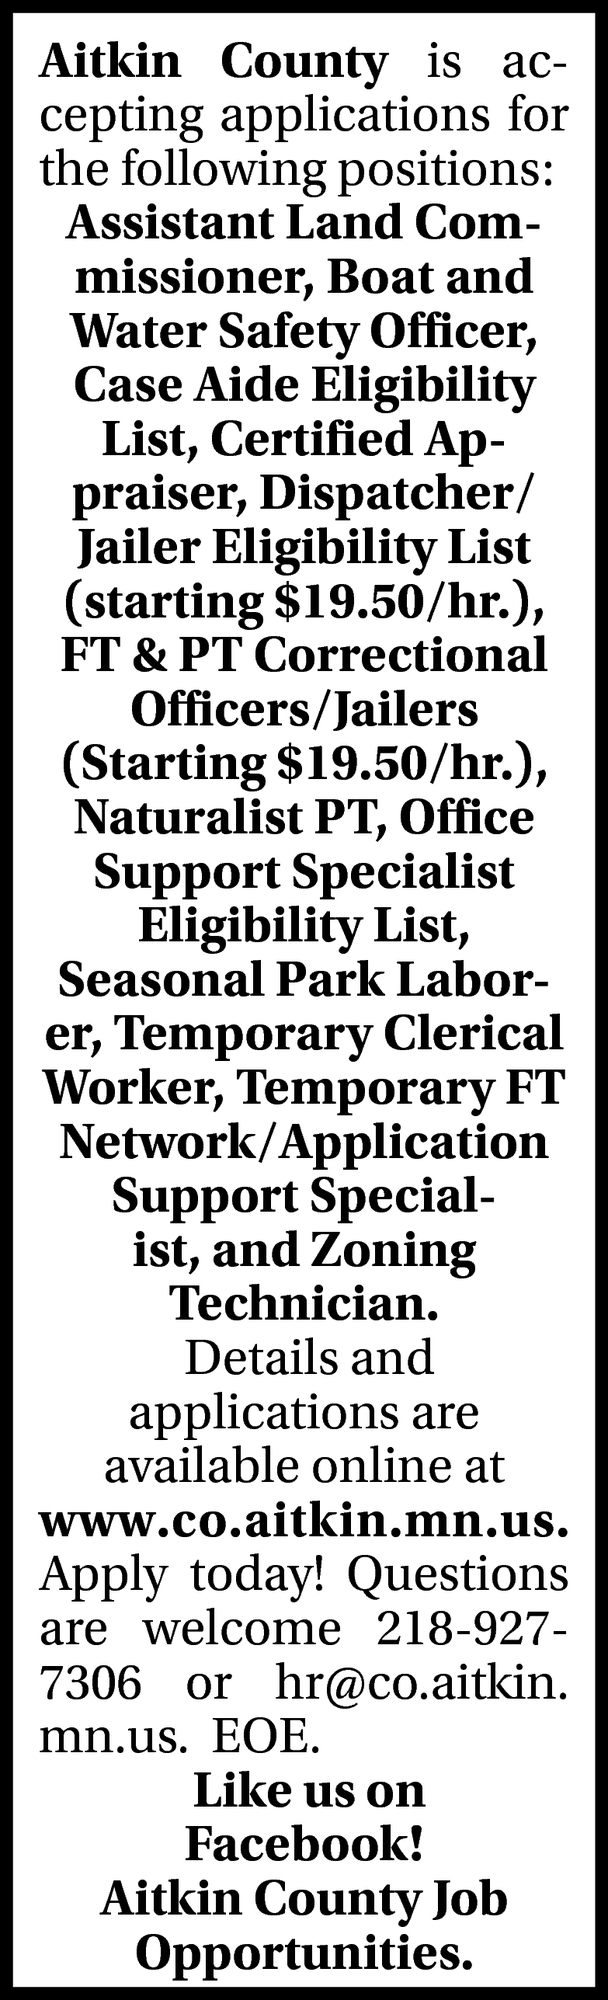 Assistant Land Commissioner, Assistant Zoning Administrator,Boat and Water Safety Officer, Case Aide Eligibility List